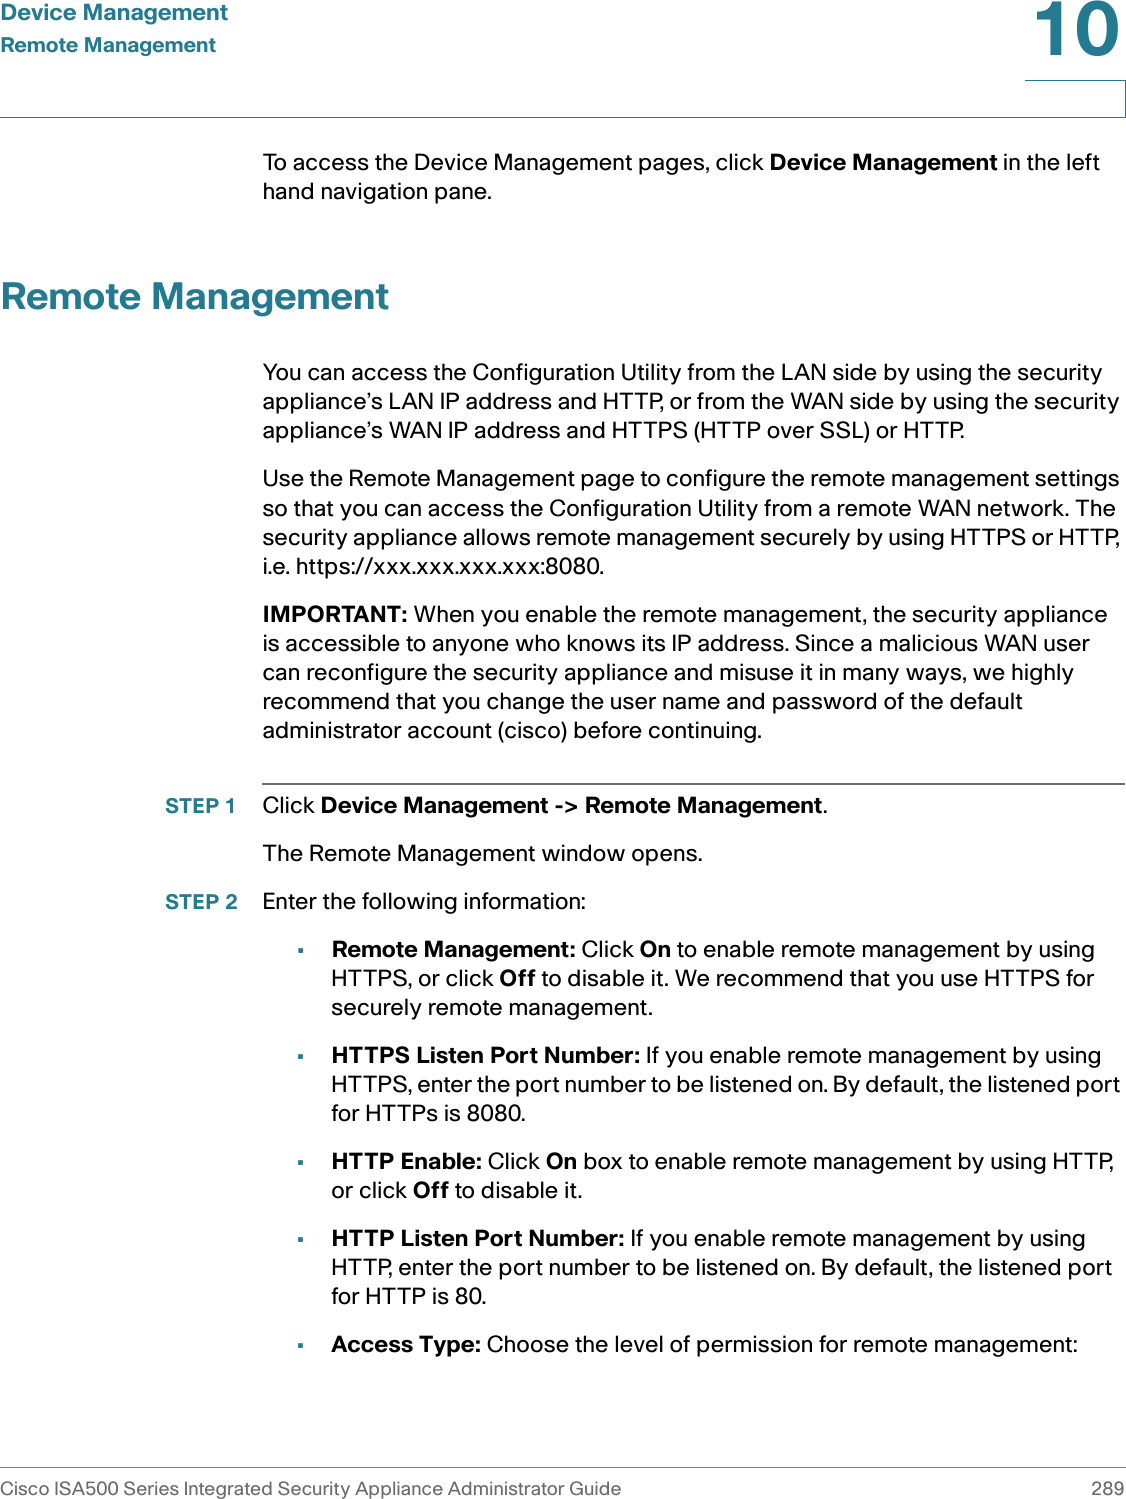 Device ManagementRemote ManagementCisco ISA500 Series Integrated Security Appliance Administrator Guide 28910 To access the Device Management pages, click Device Management in the left hand navigation pane.Remote ManagementYou can access the Configuration Utility from the LAN side by using the security appliance’s LAN IP address and HTTP, or from the WAN side by using the security appliance’s WAN IP address and HTTPS (HTTP over SSL) or HTTP. Use the Remote Management page to configure the remote management settings so that you can access the Configuration Utility from a remote WAN network. The security appliance allows remote management securely by using HTTPS or HTTP, i.e. https://xxx.xxx.xxx.xxx:8080.IMPORTANT: When you enable the remote management, the security appliance is accessible to anyone who knows its IP address. Since a malicious WAN user can reconfigure the security appliance and misuse it in many ways, we highly recommend that you change the user name and password of the default administrator account (cisco) before continuing. STEP 1 Click Device Management -&gt; Remote Management.The Remote Management window opens.STEP 2 Enter the following information: •Remote Management: Click On to enable remote management by using HTTPS, or click Off to disable it. We recommend that you use HTTPS for securely remote management. •HTTPS Listen Port Number: If you enable remote management by using HTTPS, enter the port number to be listened on. By default, the listened port for HTTPs is 8080. •HTTP Enable: Click On box to enable remote management by using HTTP, or click Off to disable it. •HTTP Listen Port Number: If you enable remote management by using HTTP, enter the port number to be listened on. By default, the listened port for HTTP is 80. •Access Type: Choose the level of permission for remote management: